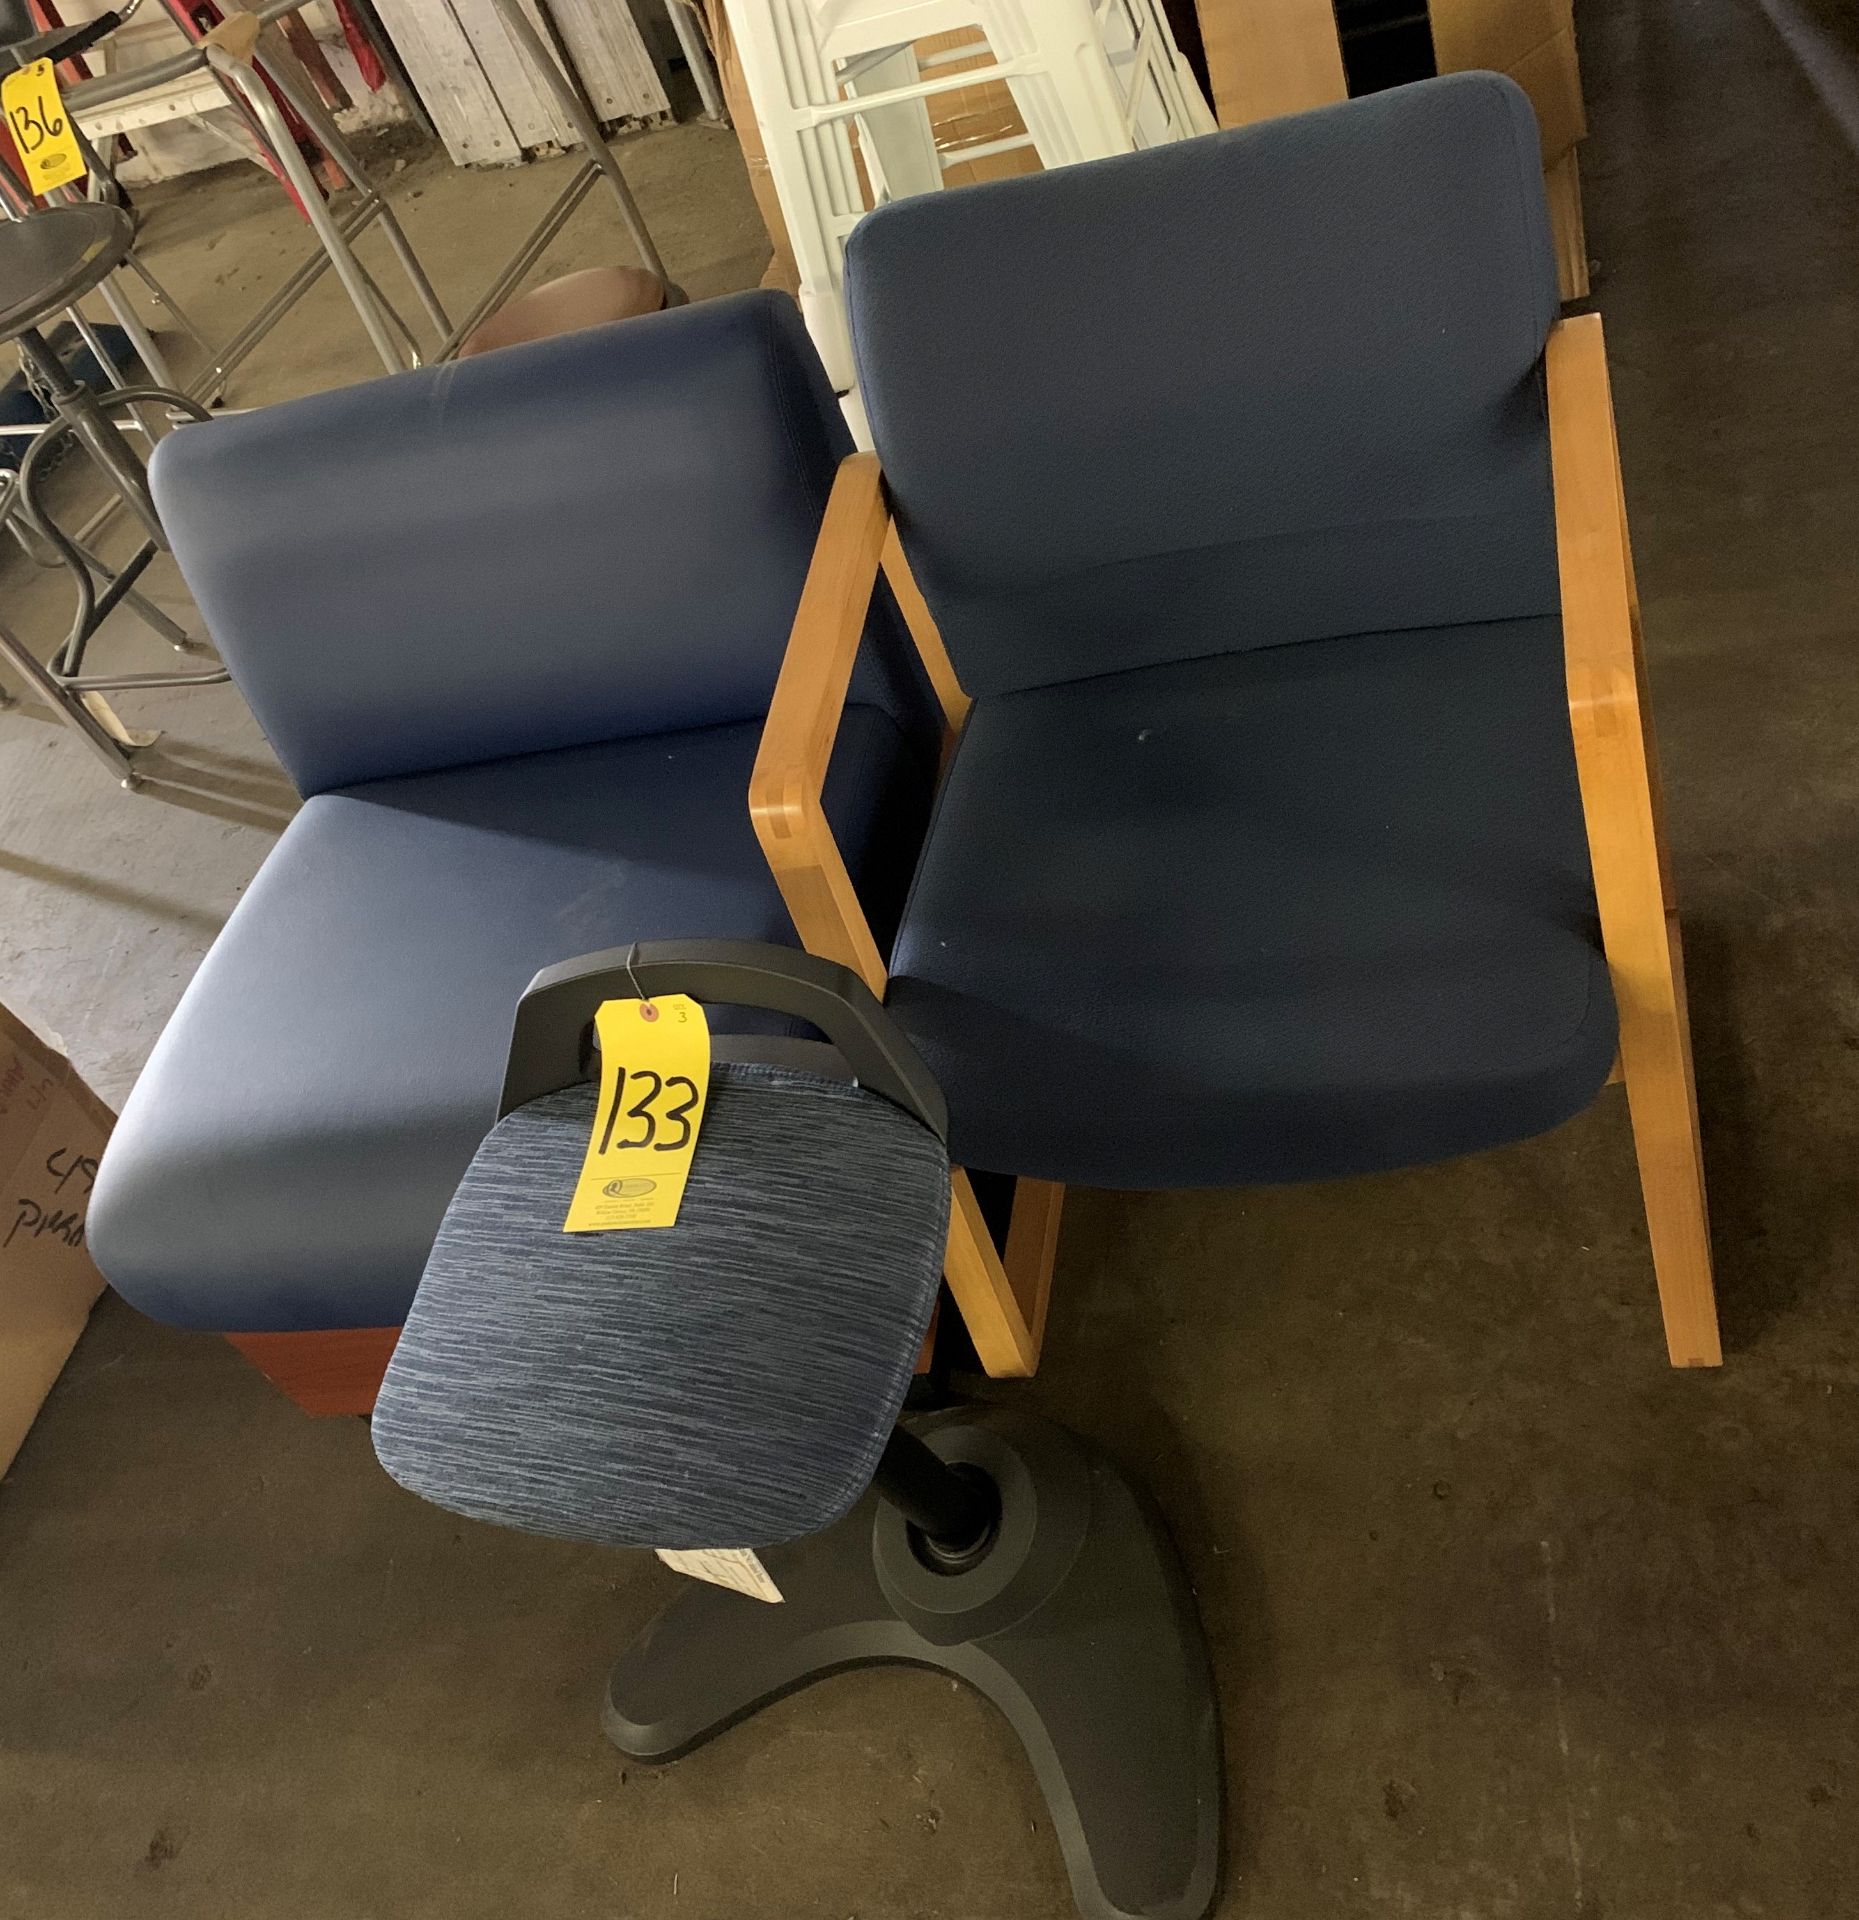 (2) SIDE CHAIRS AND ONE ALERA LOW-BACK STOOL